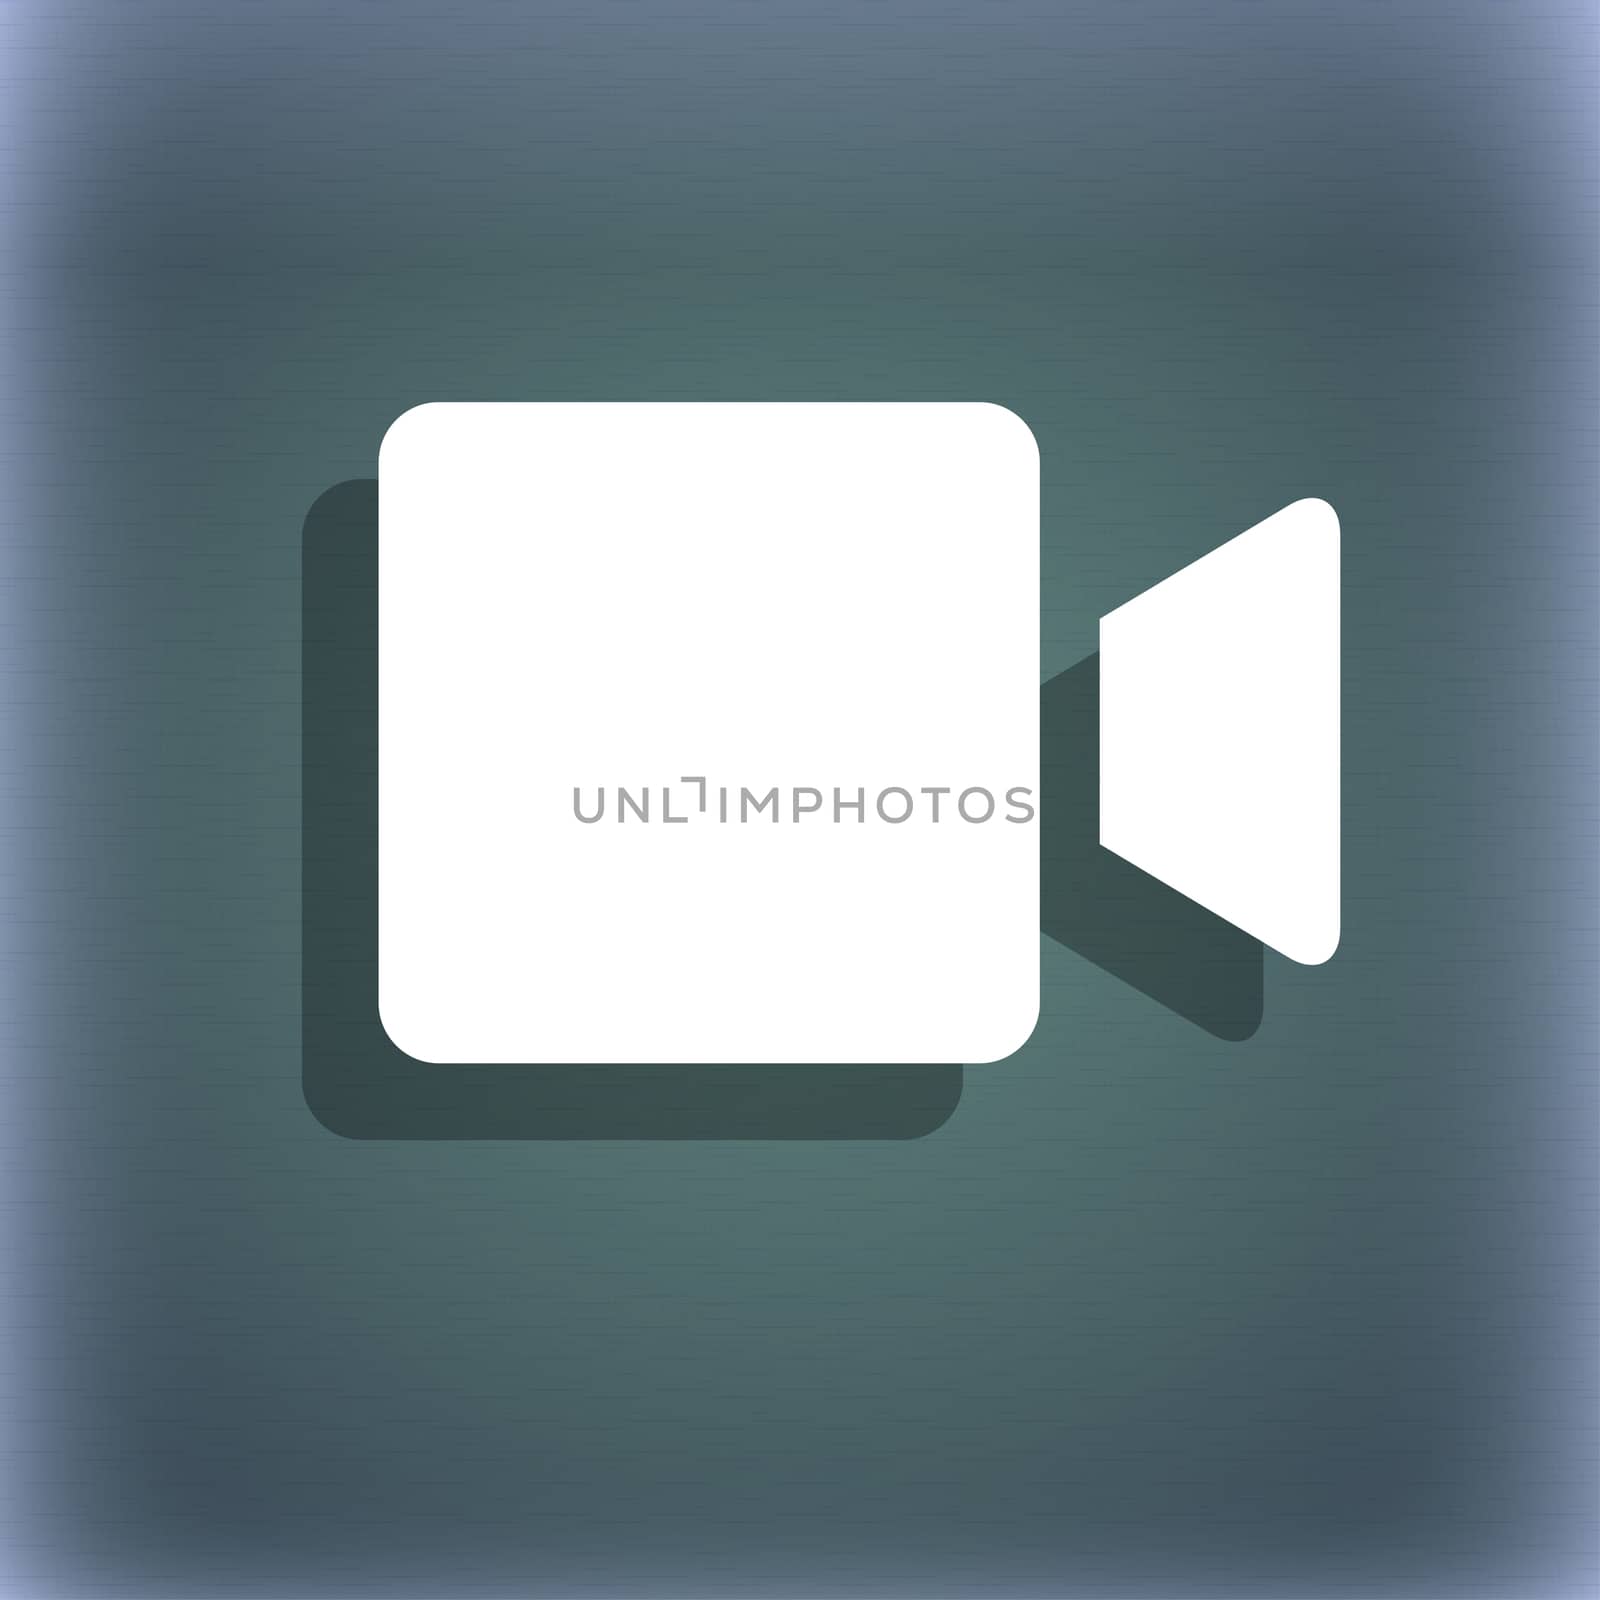 Video camera icon symbol on the blue-green abstract background with shadow and space for your text. illustration